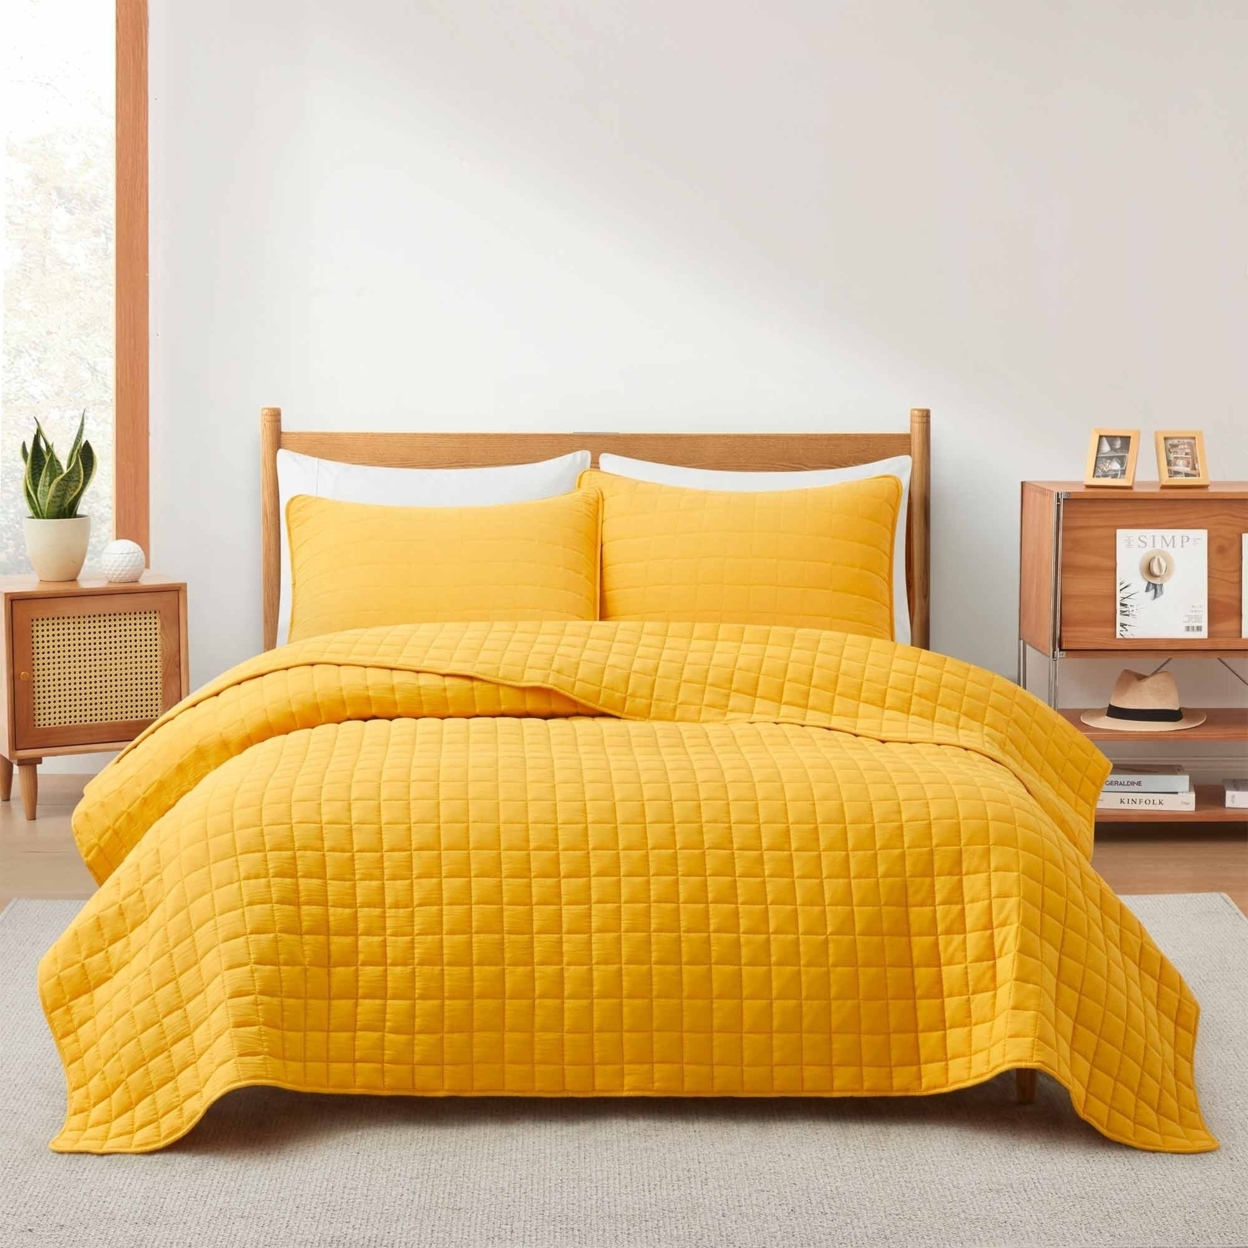 3 Piece Coverlet Set Lightweight Quilt Set With Shams - Yellow, King